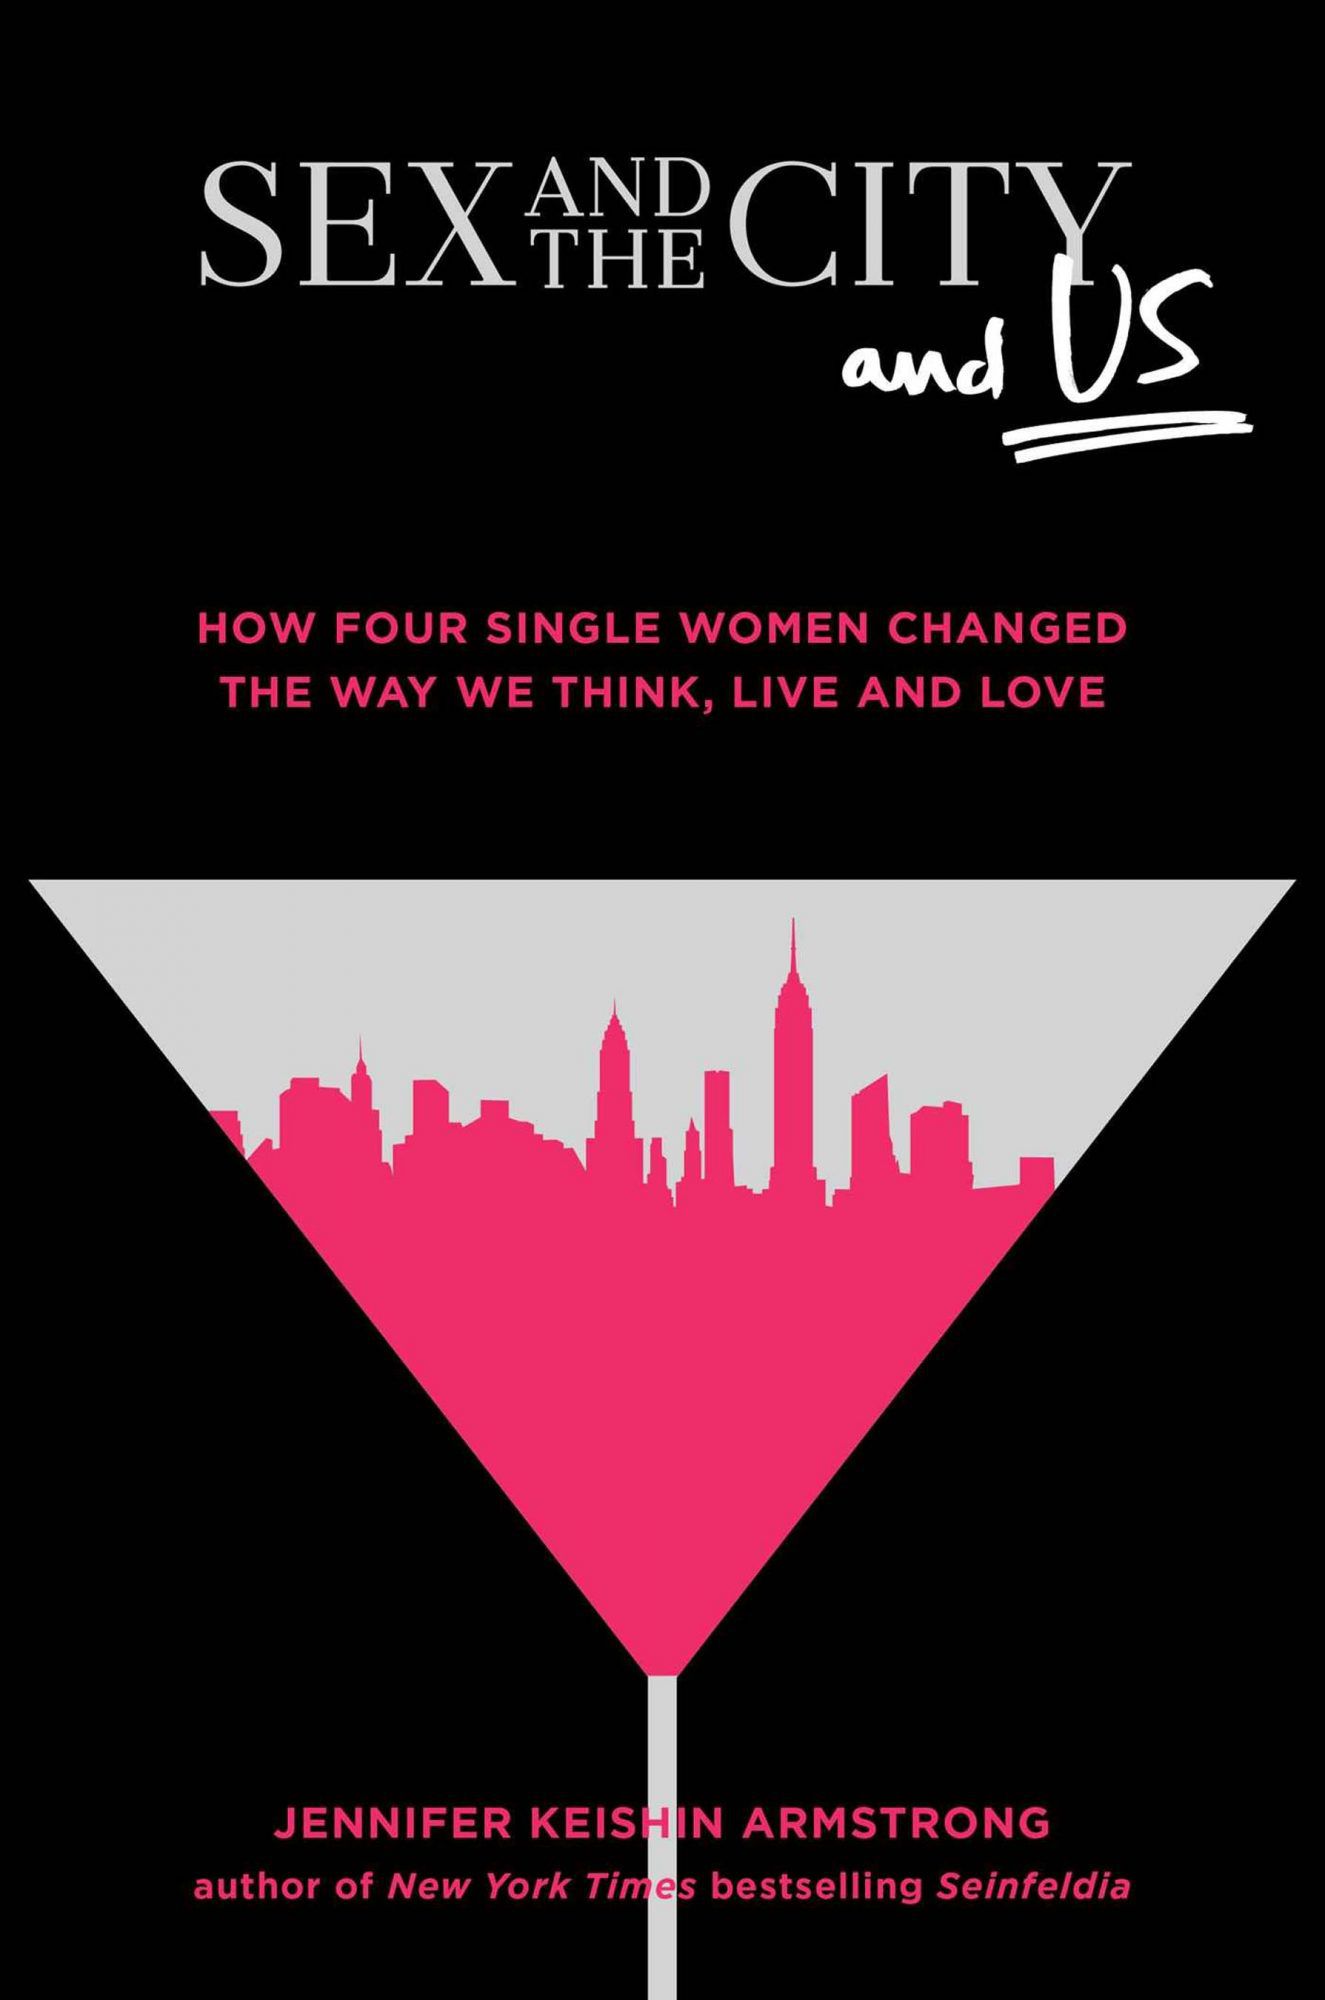 Sex and the City and Us, by Jennifer Keishin Armstrong